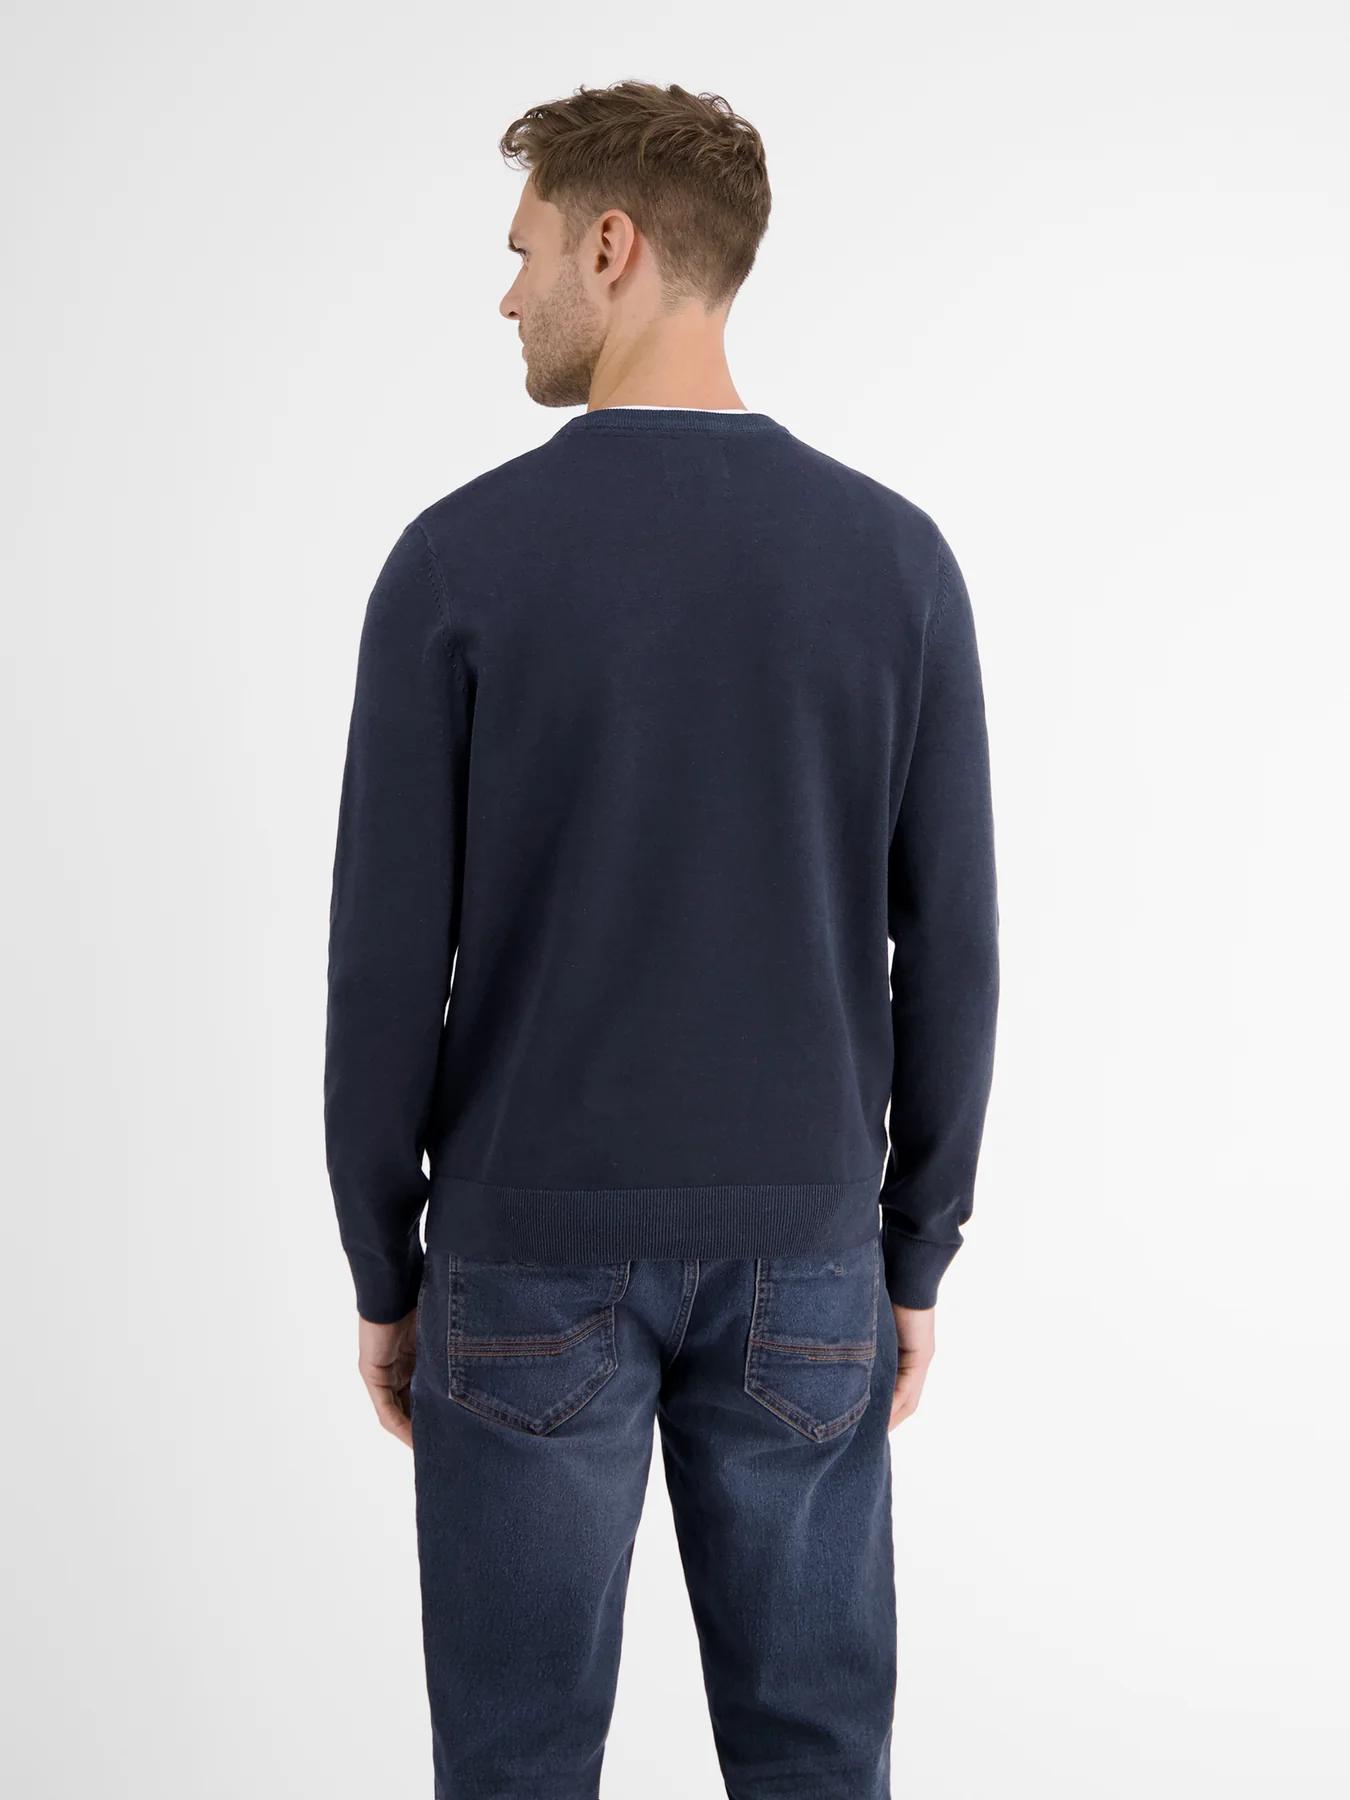 / Classic Blues Sweater with | Blue - Stripes - LERROS Navy Cotton